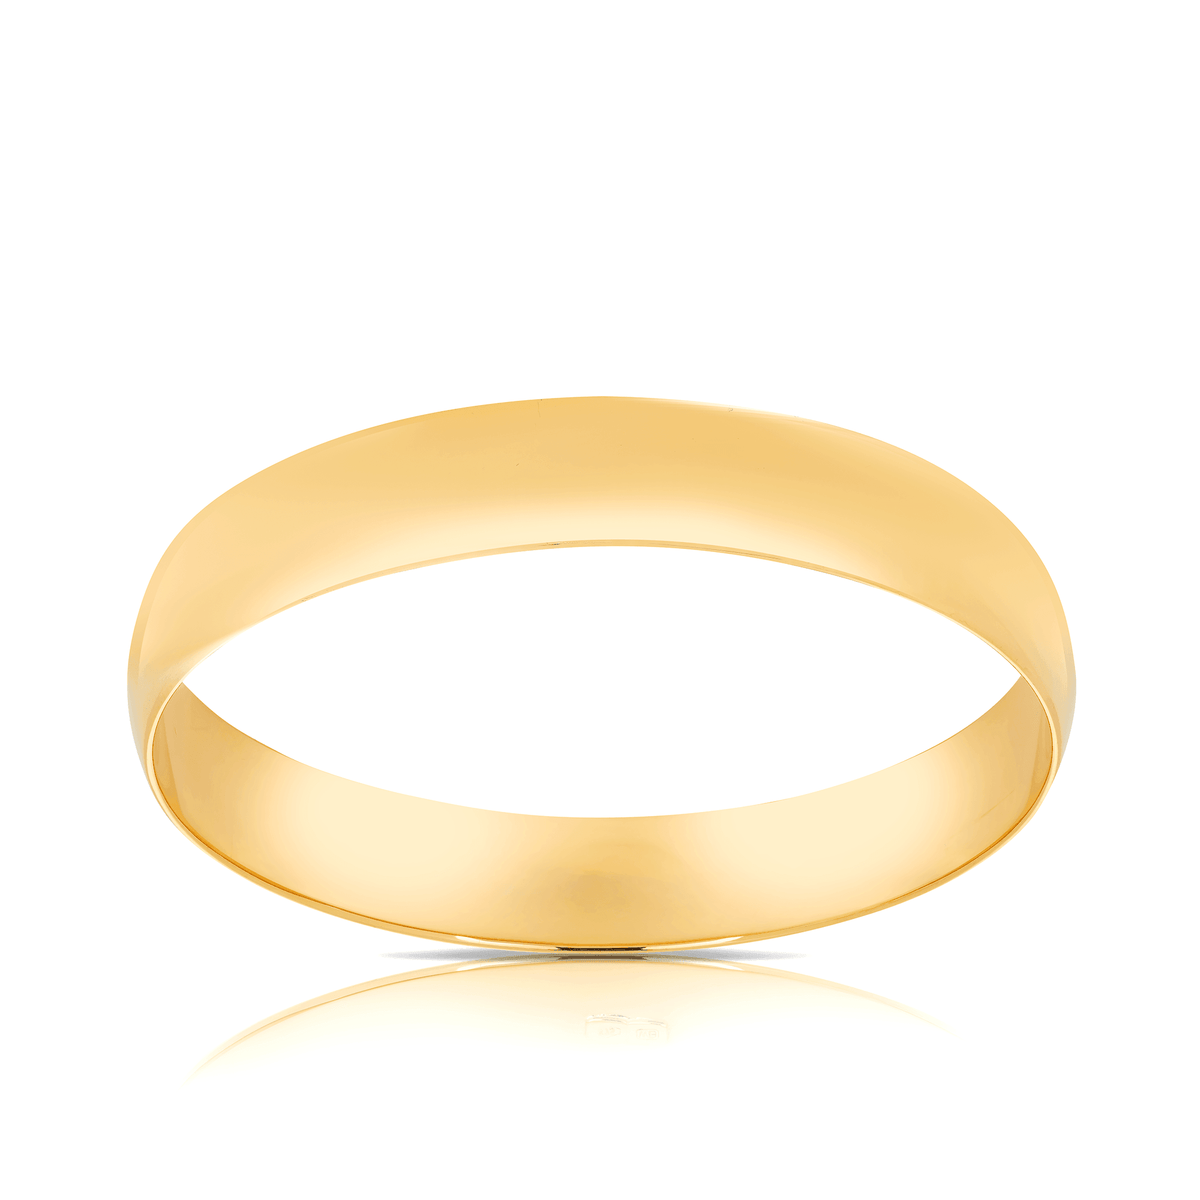 Solid Round Bangle in 9ct Yellow Gold - Wallace Bishop